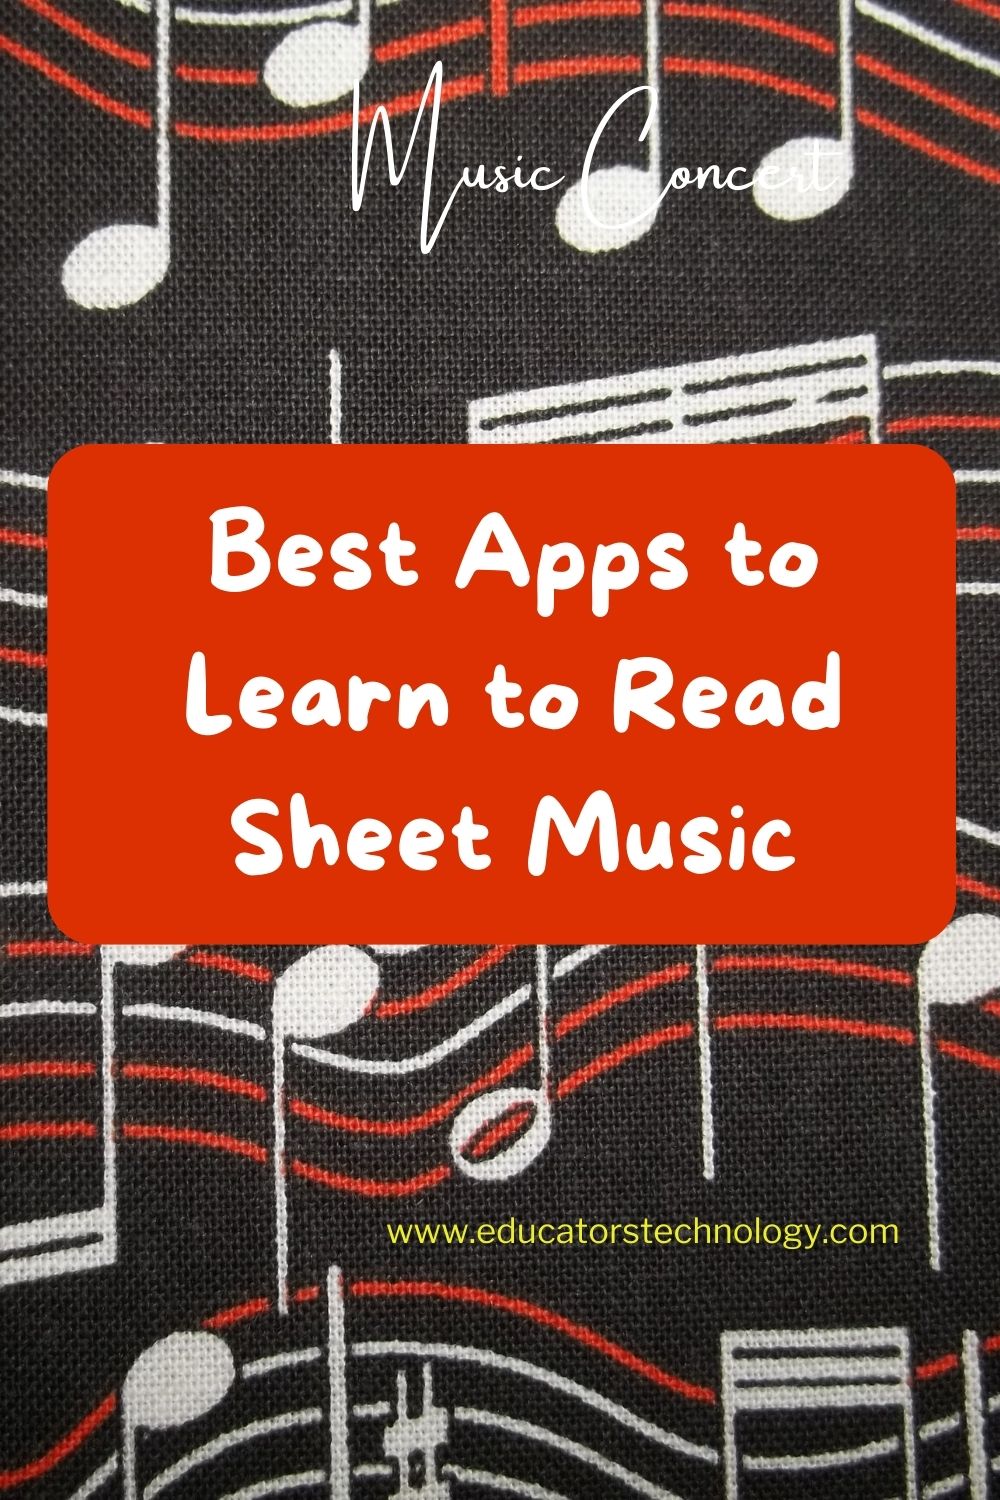 Apps to learn to read sheet music